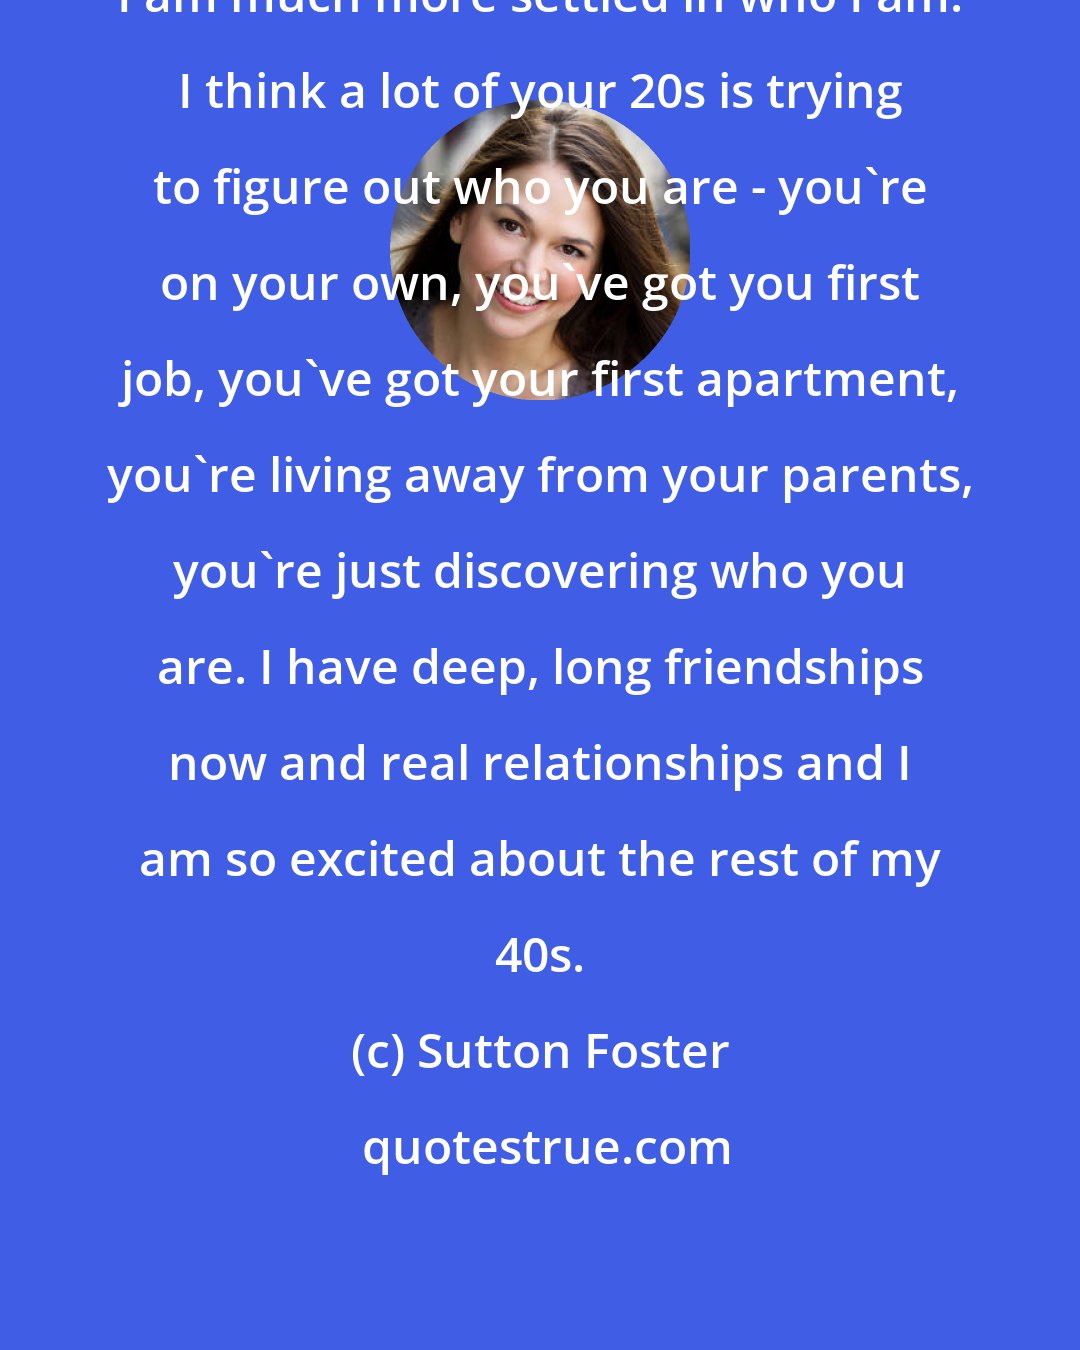 Sutton Foster: I am much more settled in who I am. I think a lot of your 20s is trying to figure out who you are - you're on your own, you've got you first job, you've got your first apartment, you're living away from your parents, you're just discovering who you are. I have deep, long friendships now and real relationships and I am so excited about the rest of my 40s.